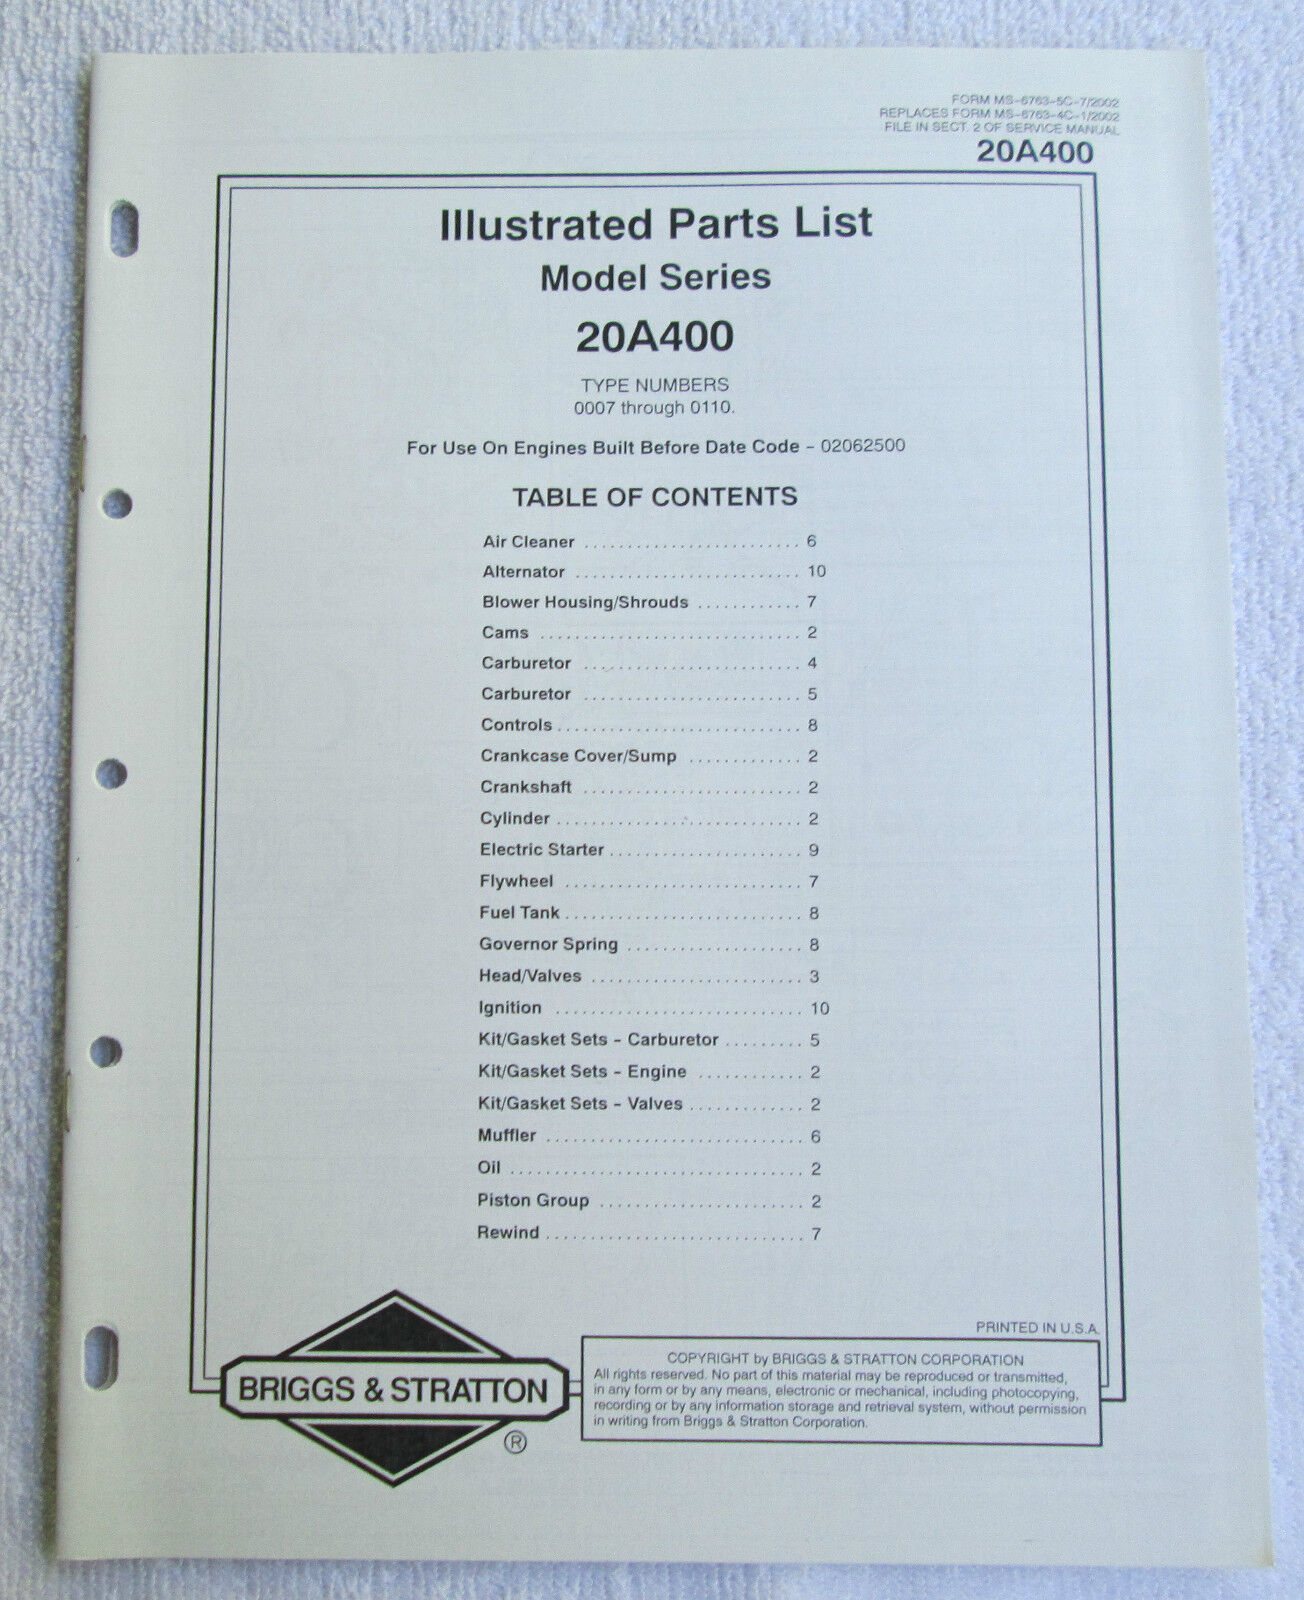 Briggs & Stratton Engines Illustrated Parts List Model Series 20A400 USA Manual